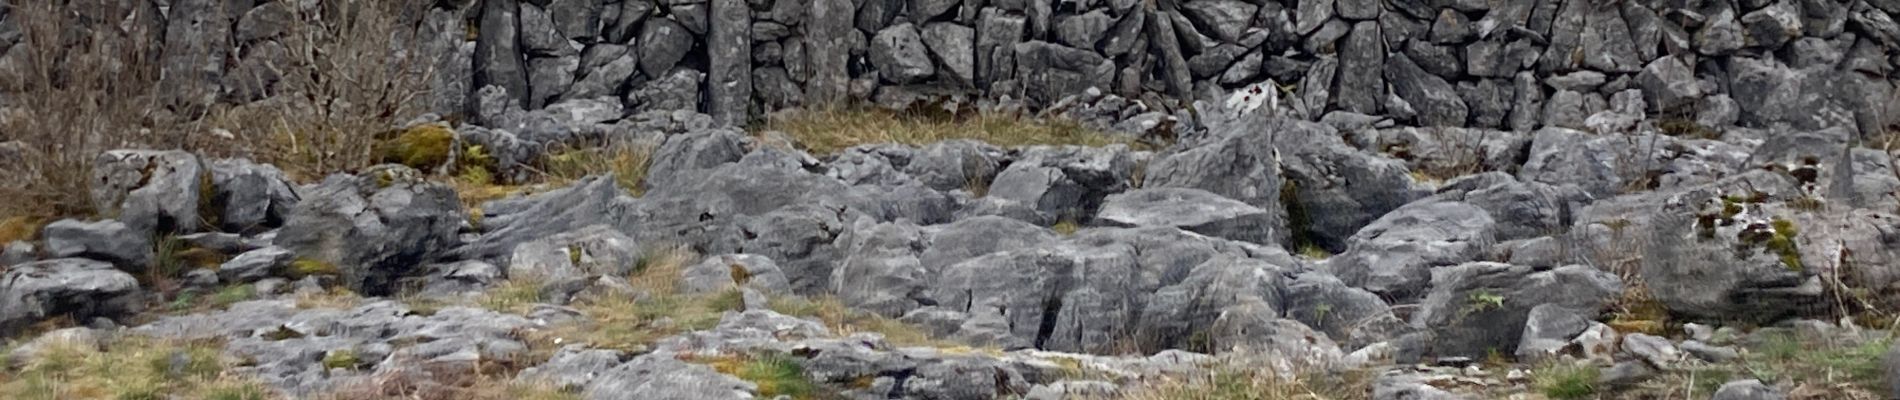 Trail Walking West Clare Municipal District - Burren - the blue and white trains - Photo